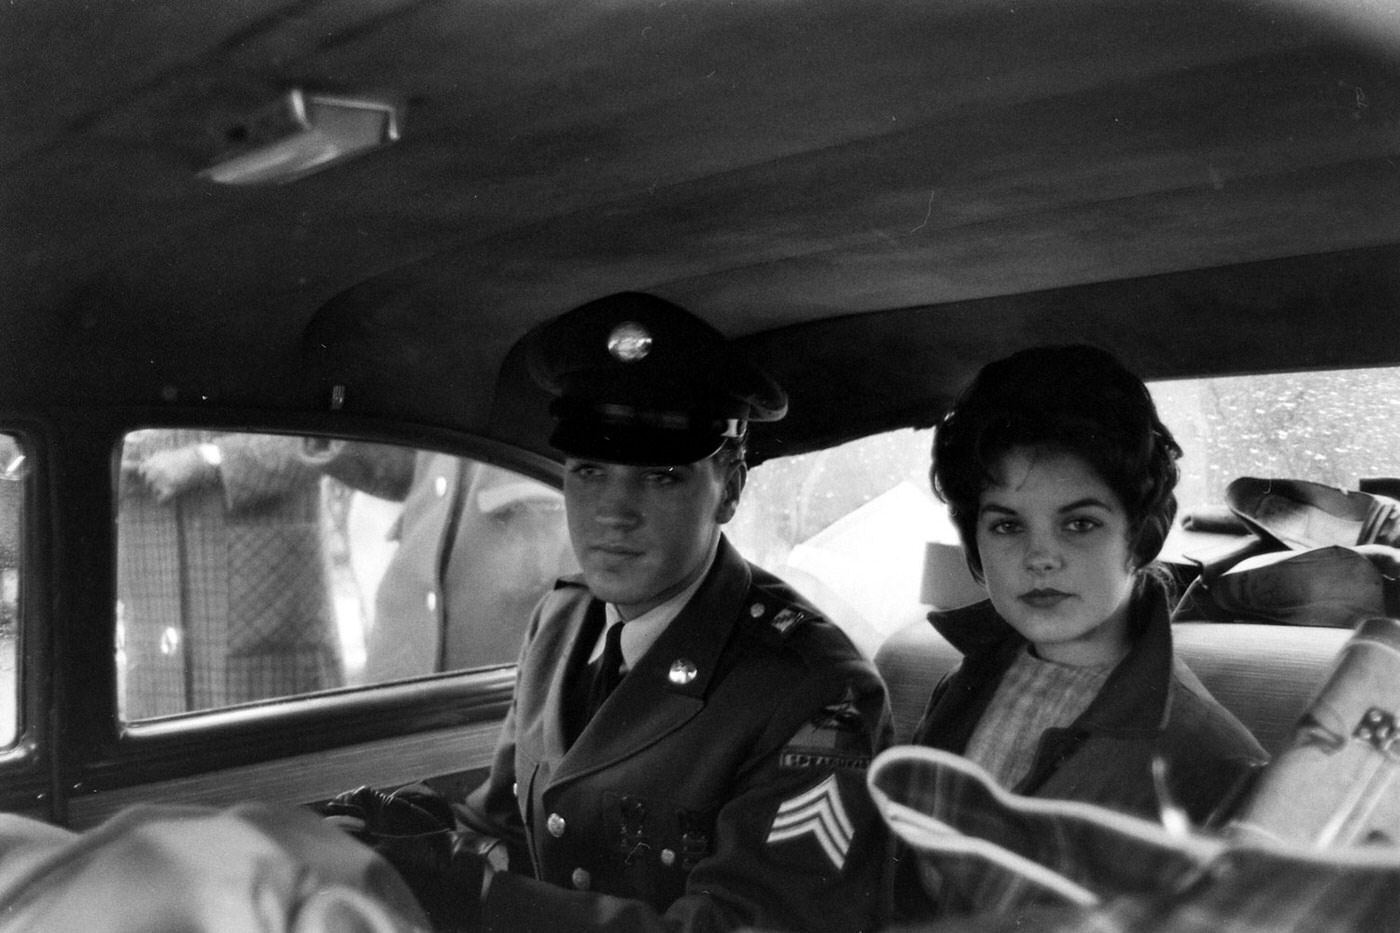 Elvis and Priscilla leave the house he and his family occupied in Bad Nauheim, Germany, March 1960.